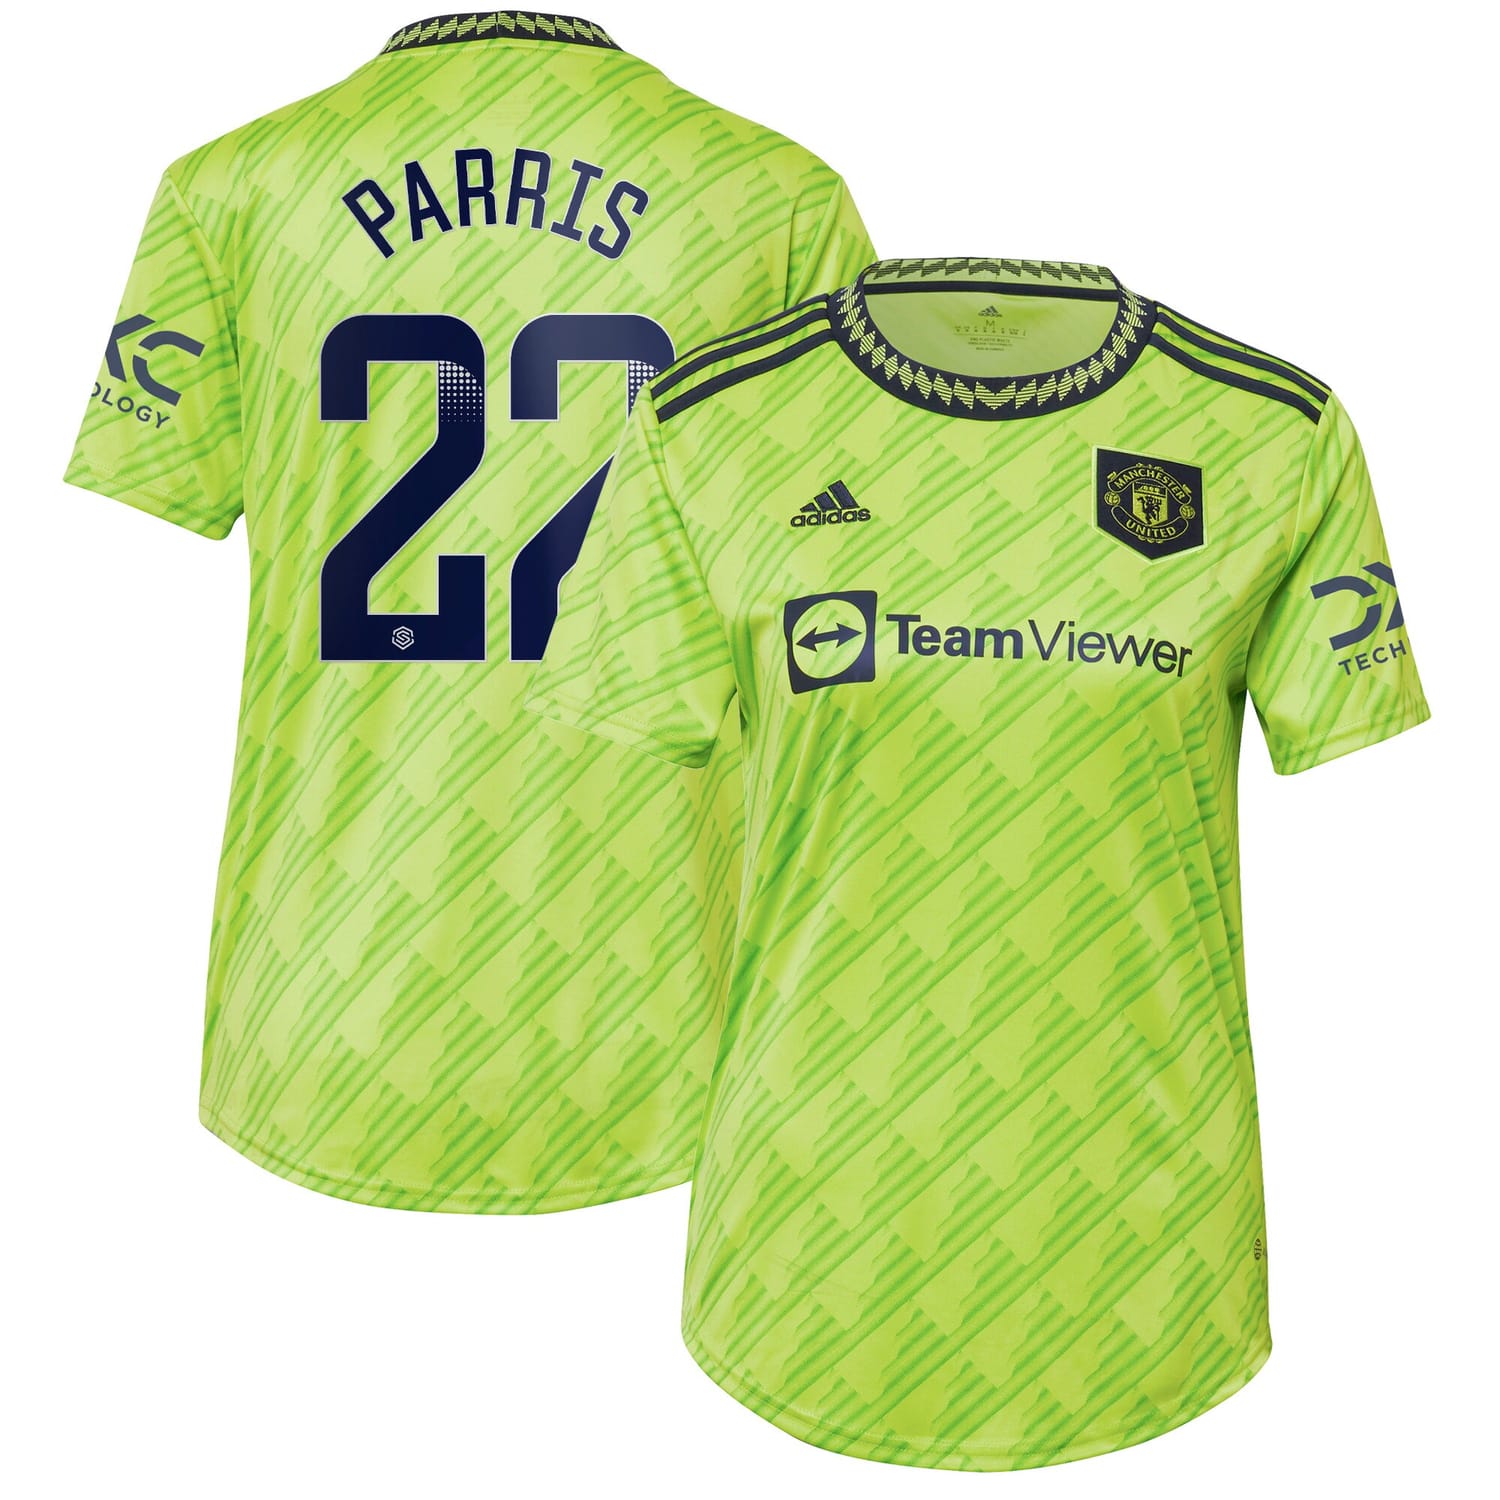 Premier League Manchester United Third WSL Jersey Shirt 2022-23 player Nikita Parris 22 printing for Women